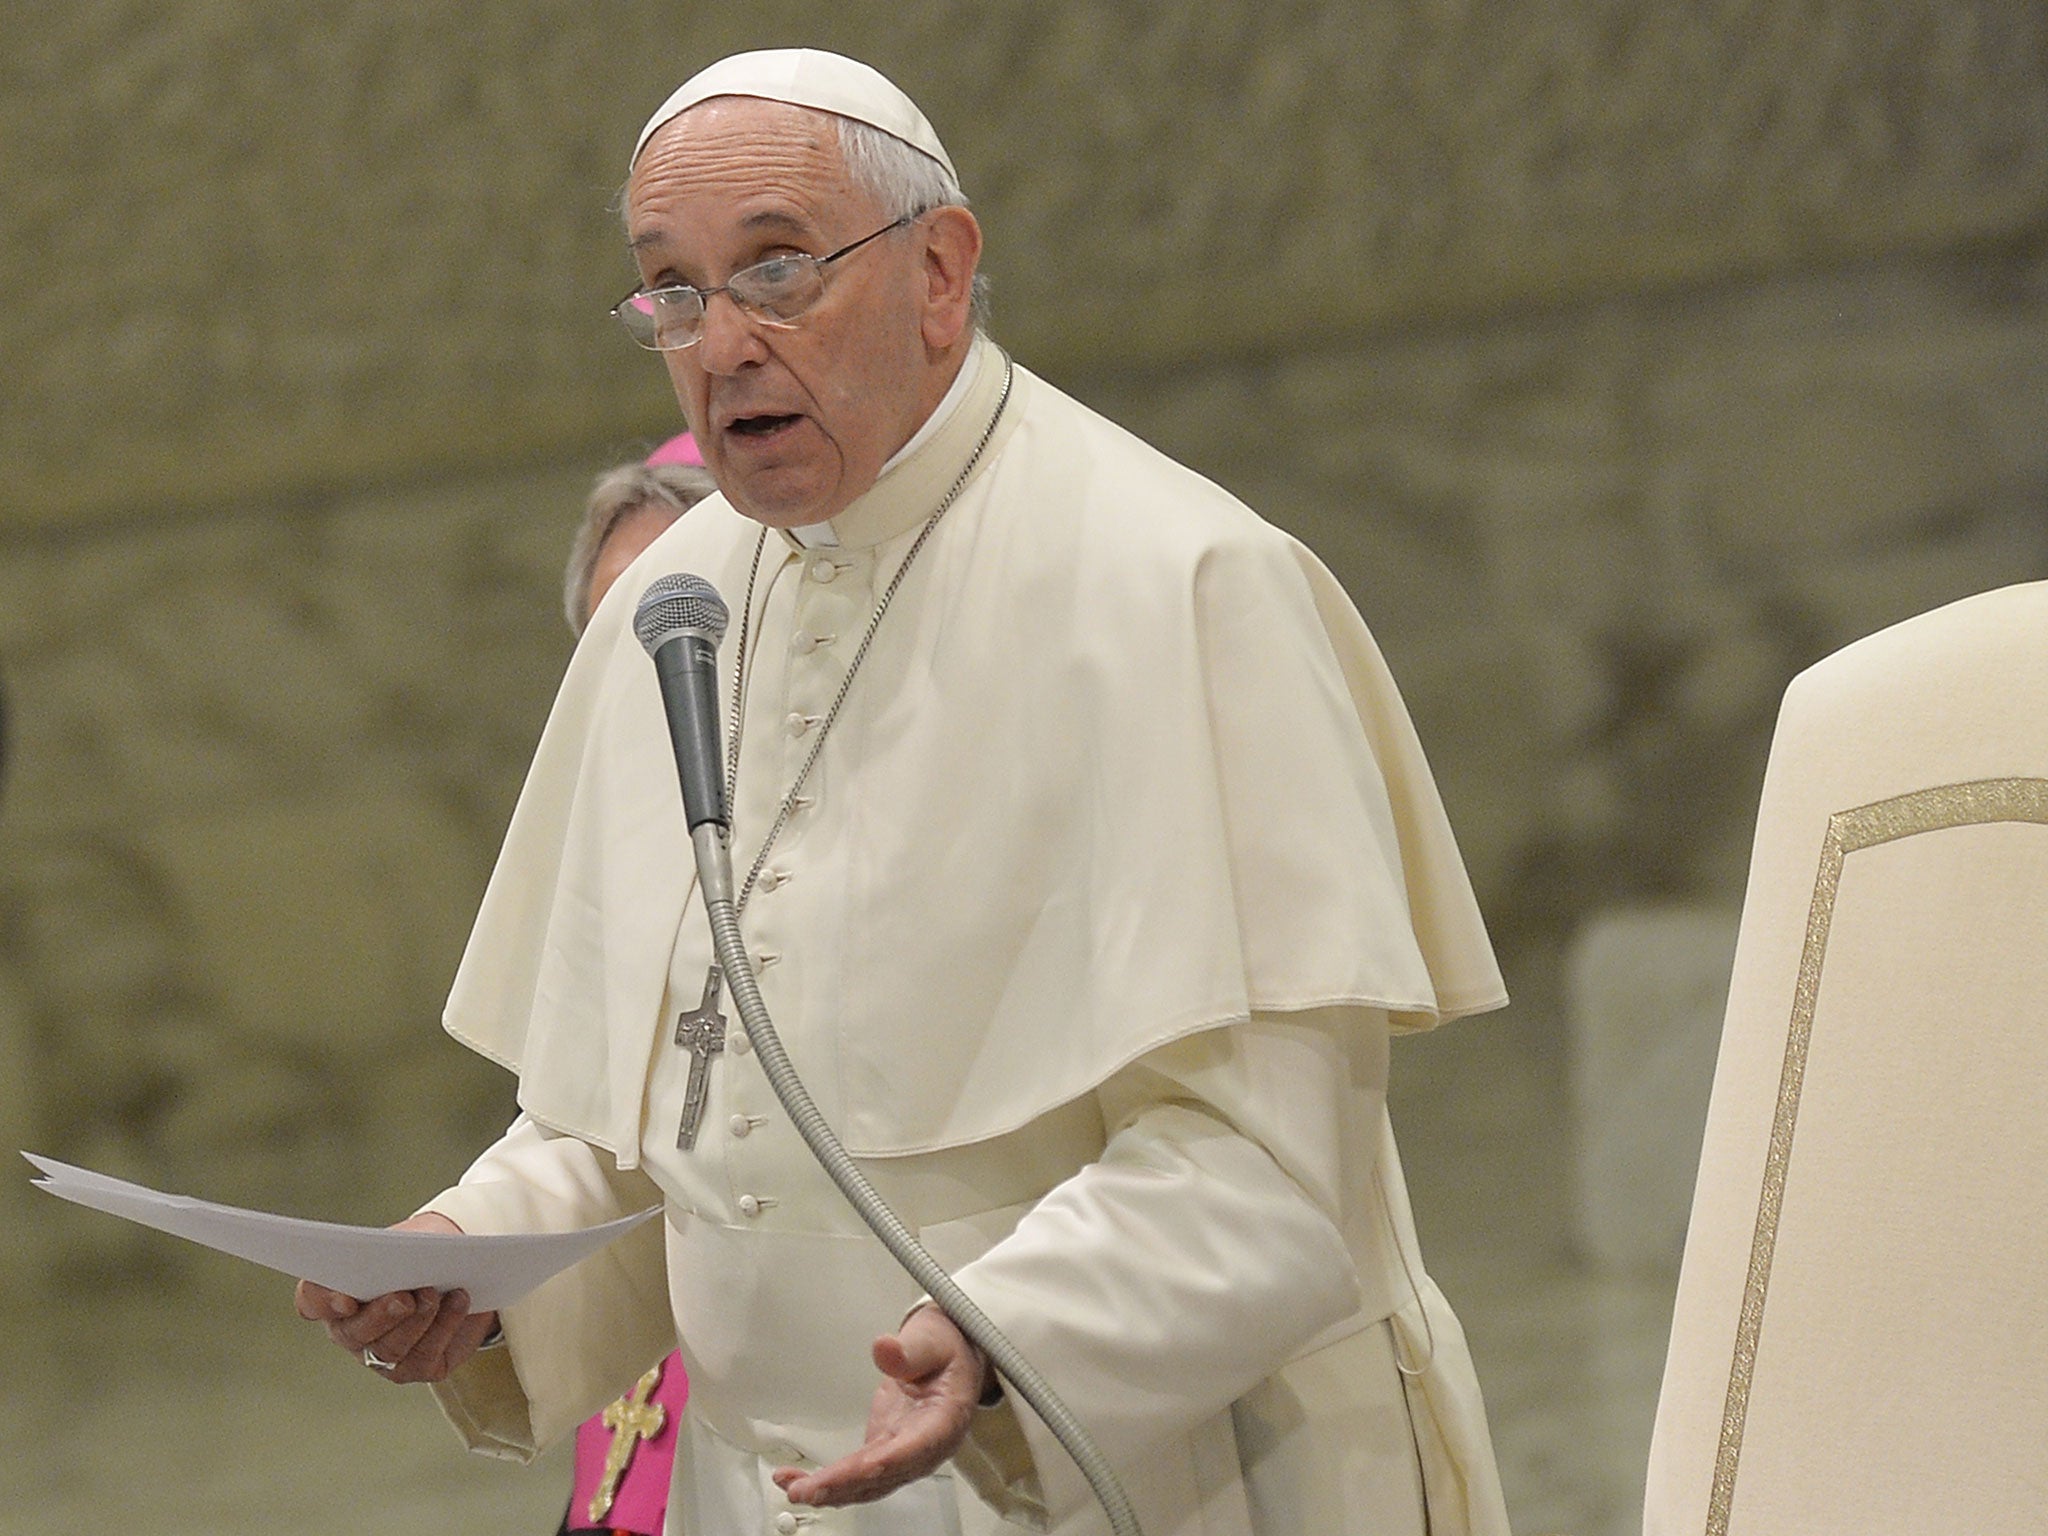 Pope Francis decried 'the scourge of abortion' as an 'attack against life'